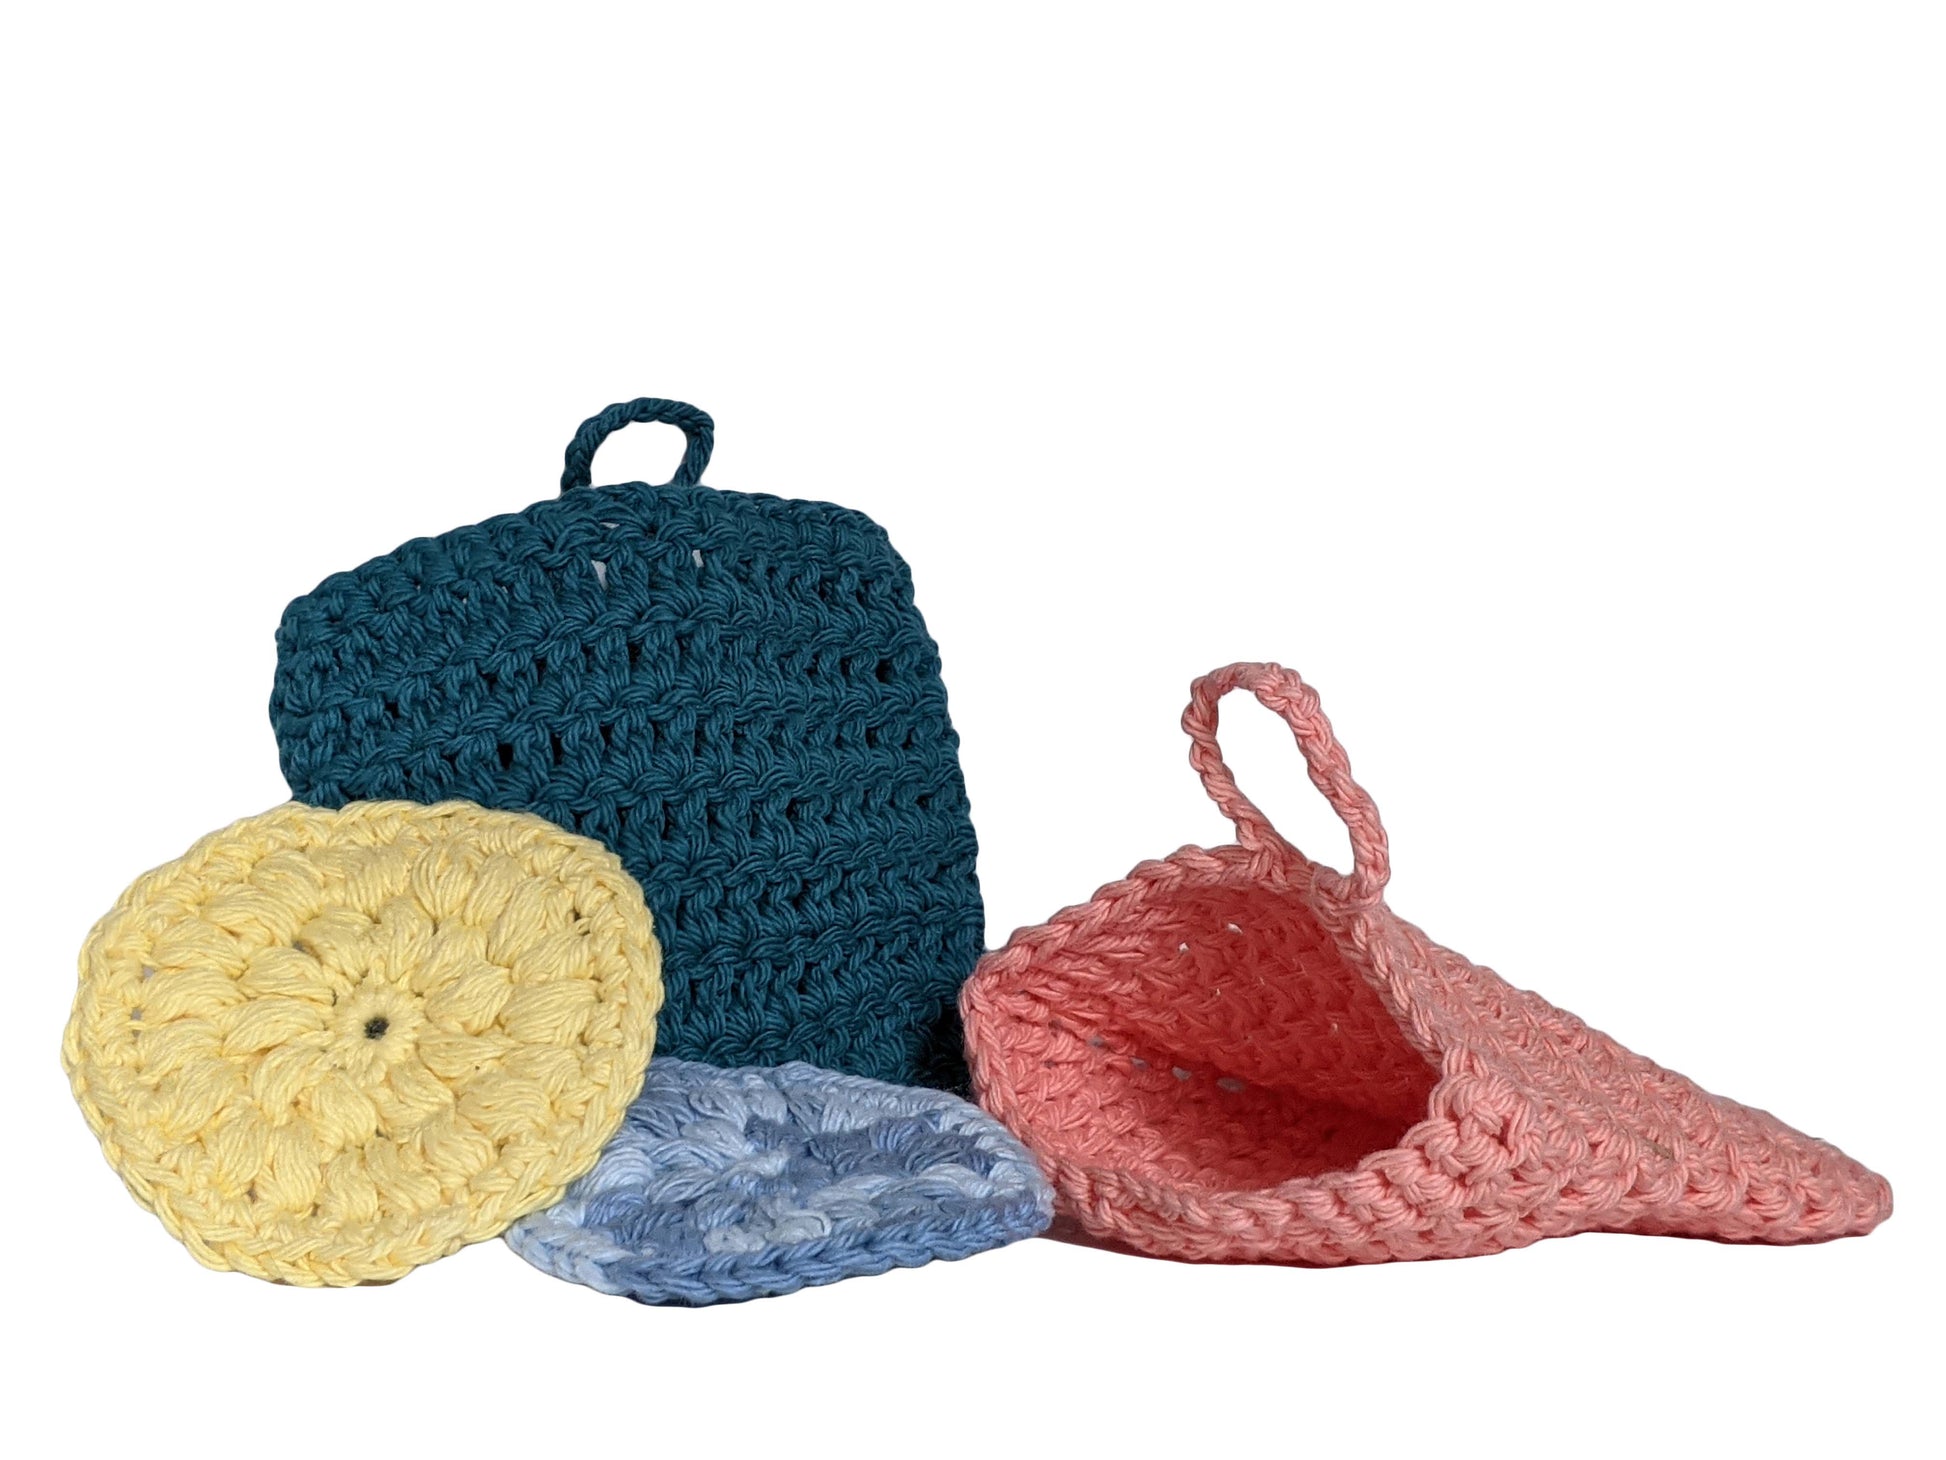 Crocheted Soap Saver Cozie | By Robin Creations 